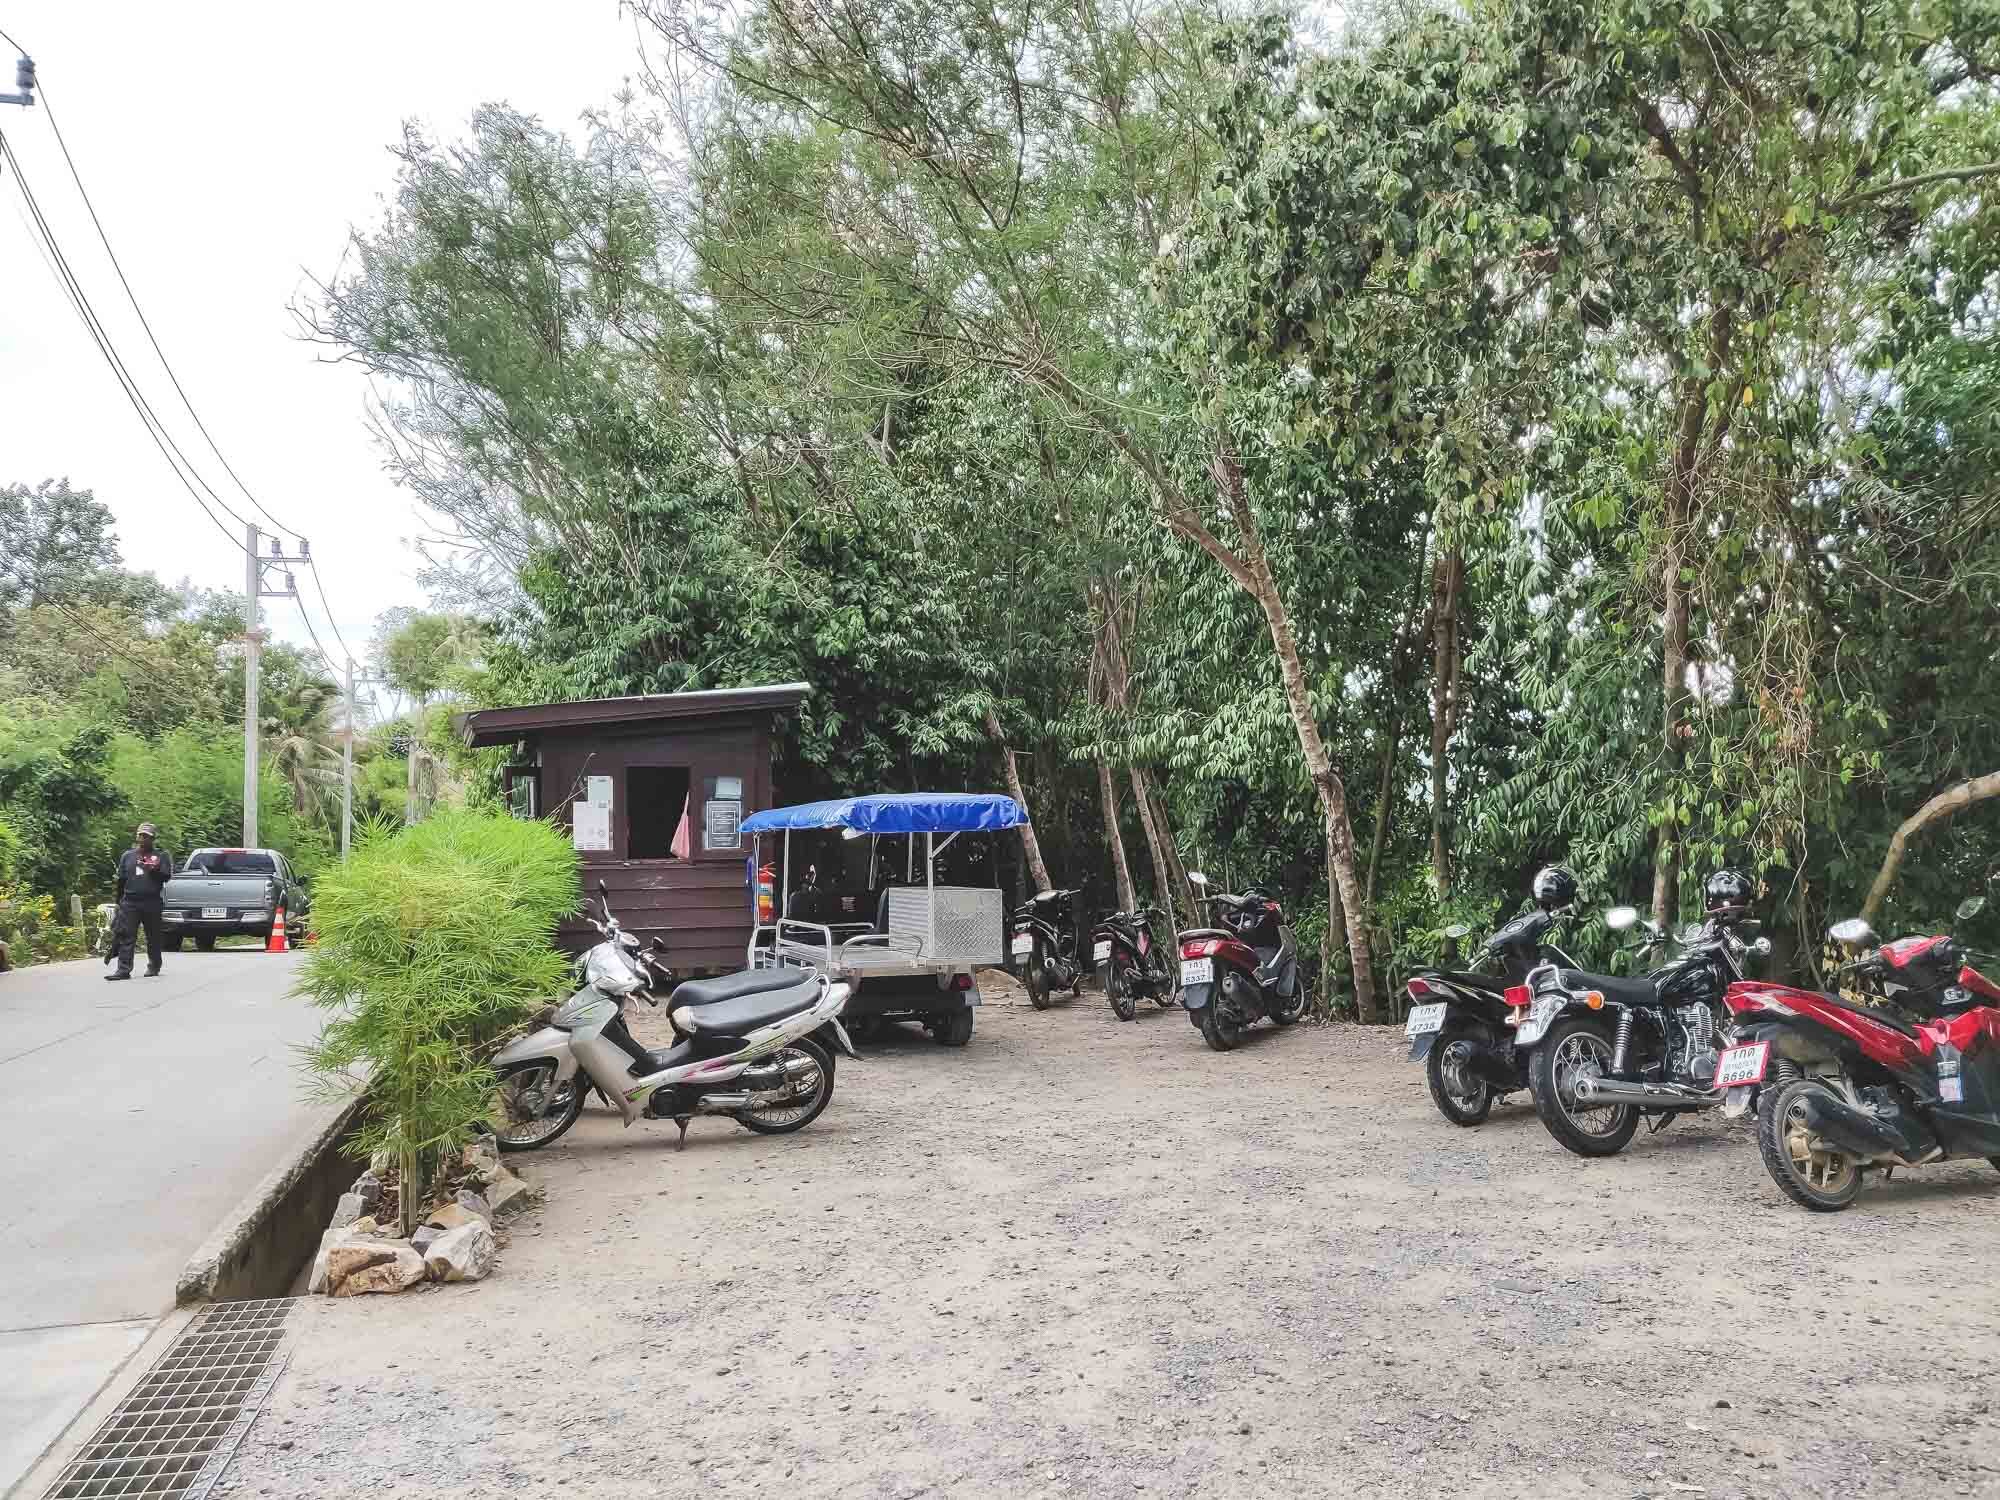 Motorcycle parking area